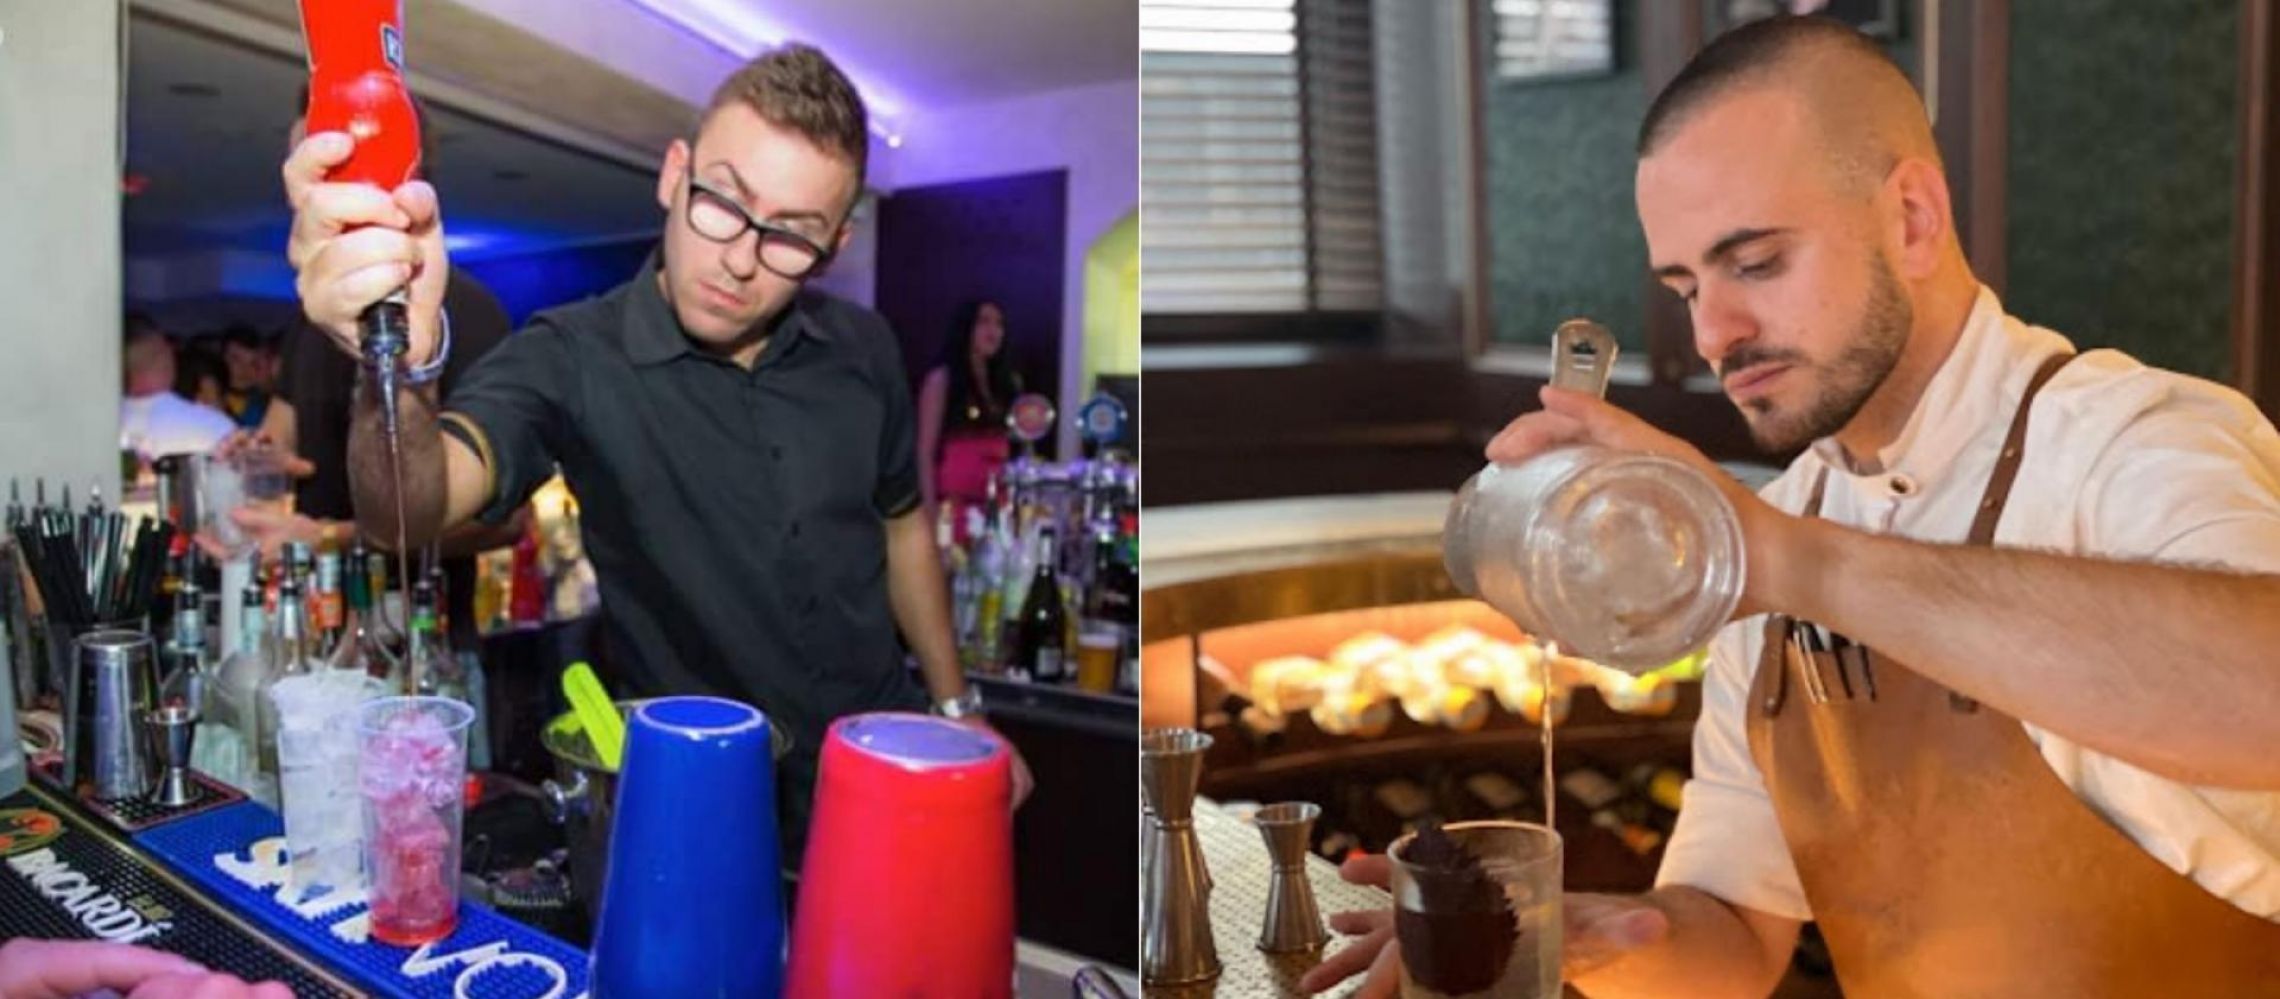 Photo for: London’s bartenders and their exquisite bar selection to unwind